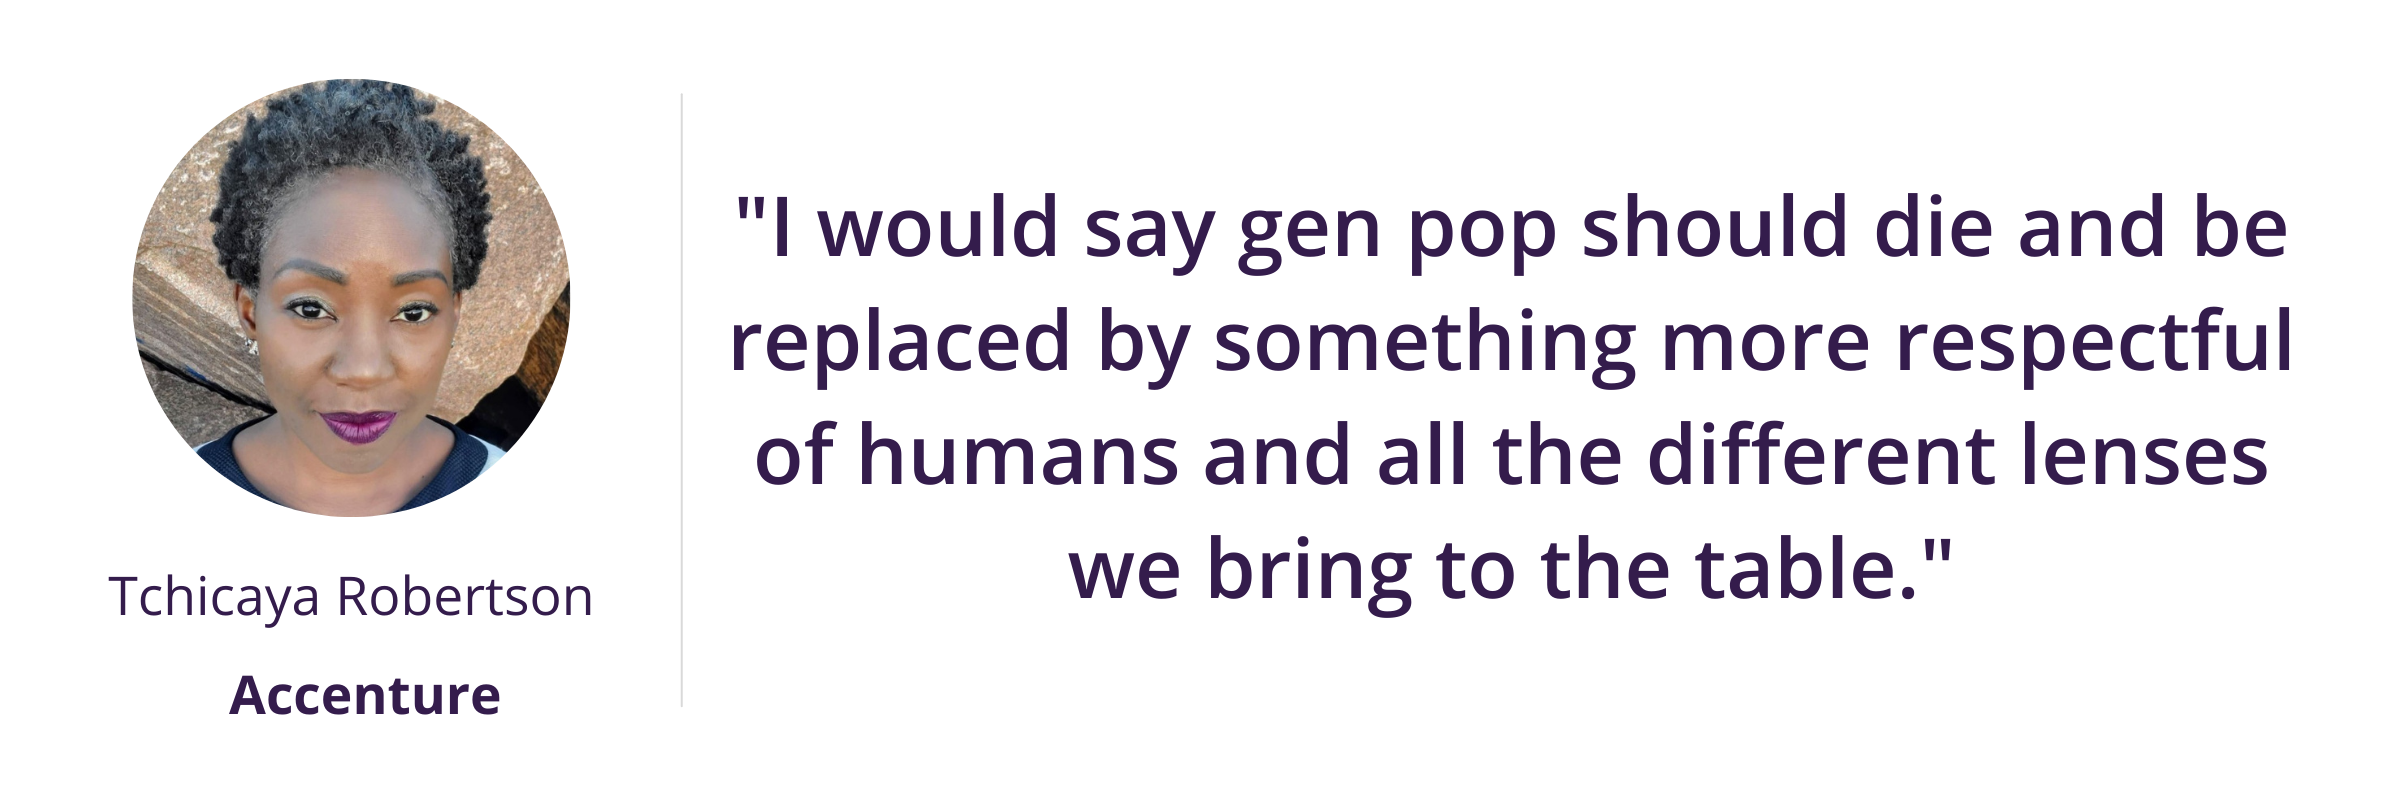 I would say gen pop should die and be replaced by something more respectful of humans and all the different lenses we bring to the table.